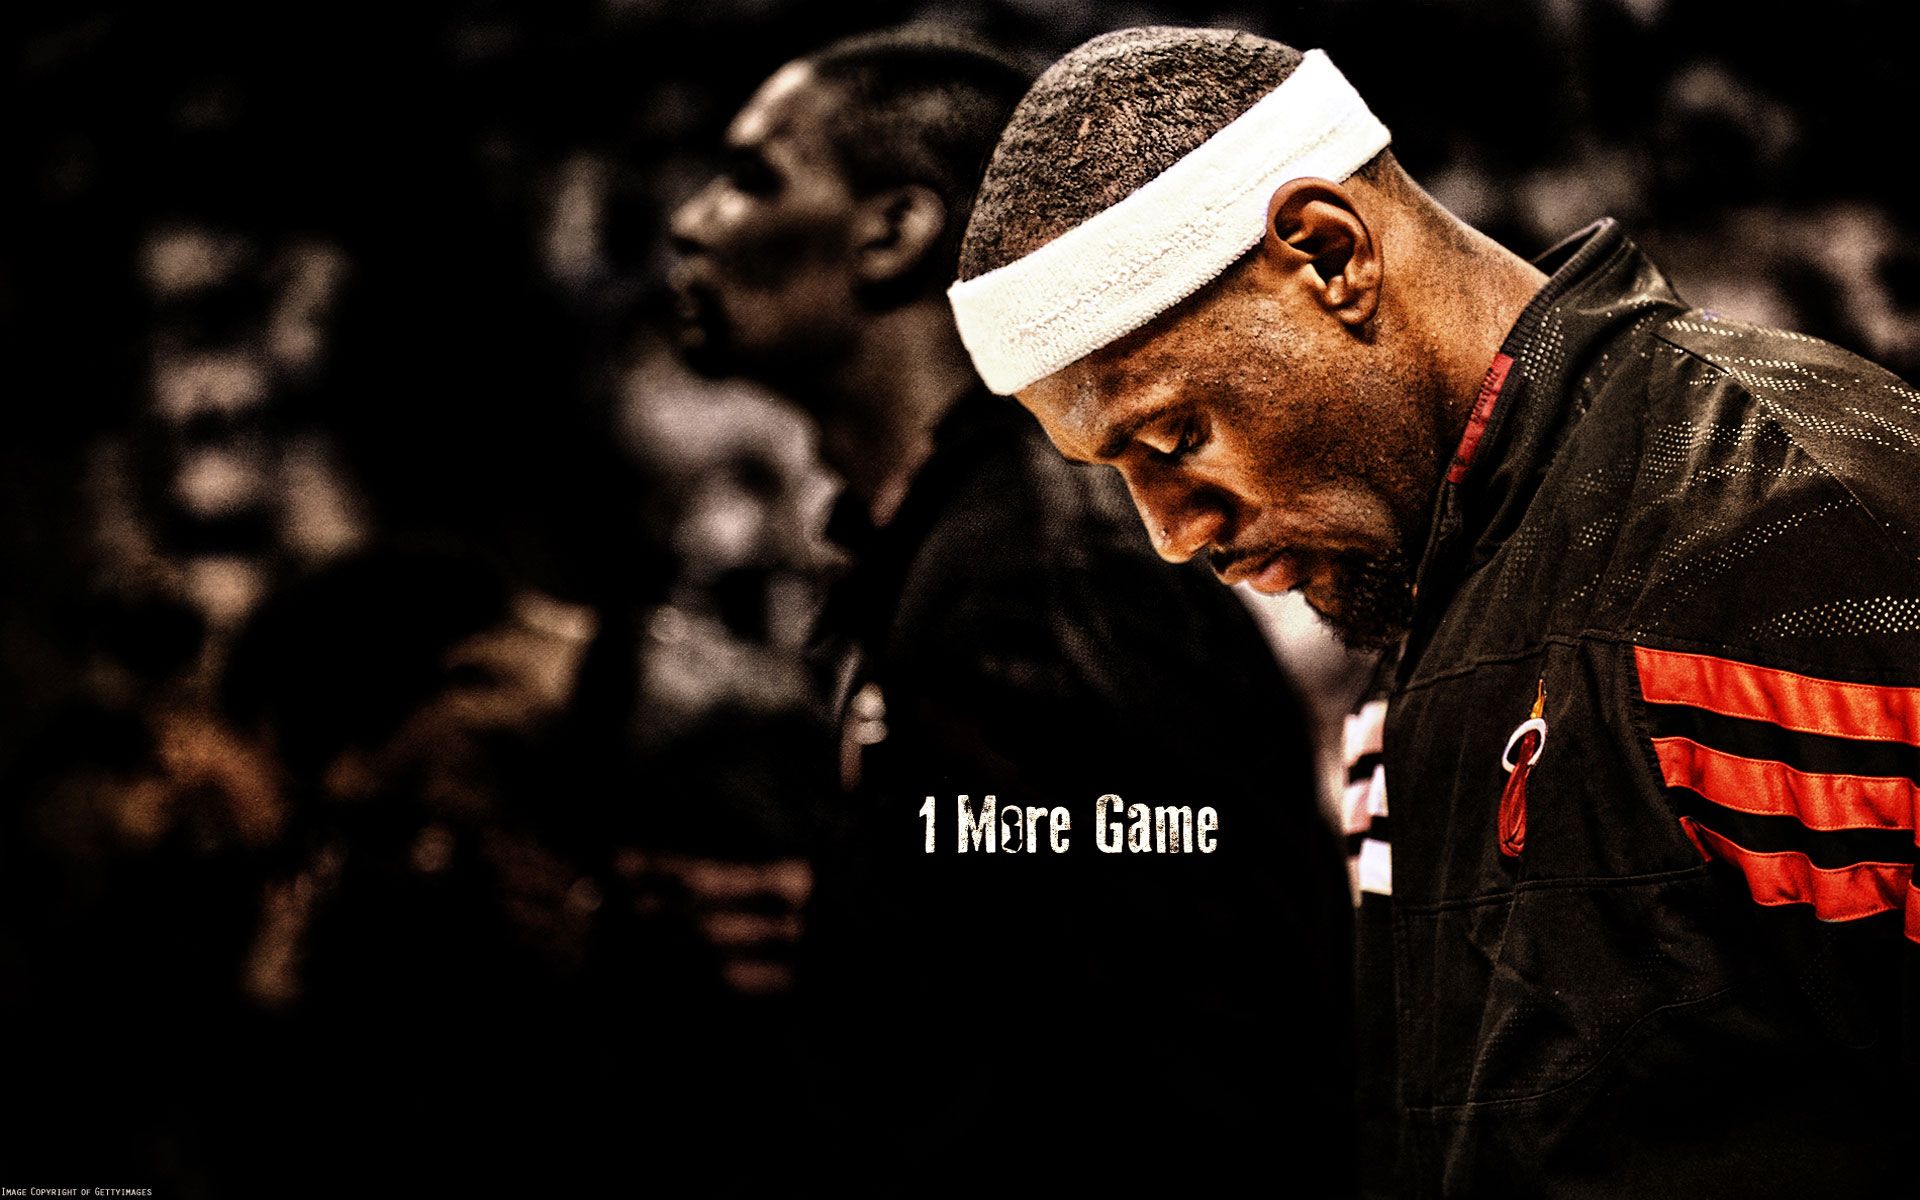 LeBron James desktop wallppaers for your Tablet or PC, Mac